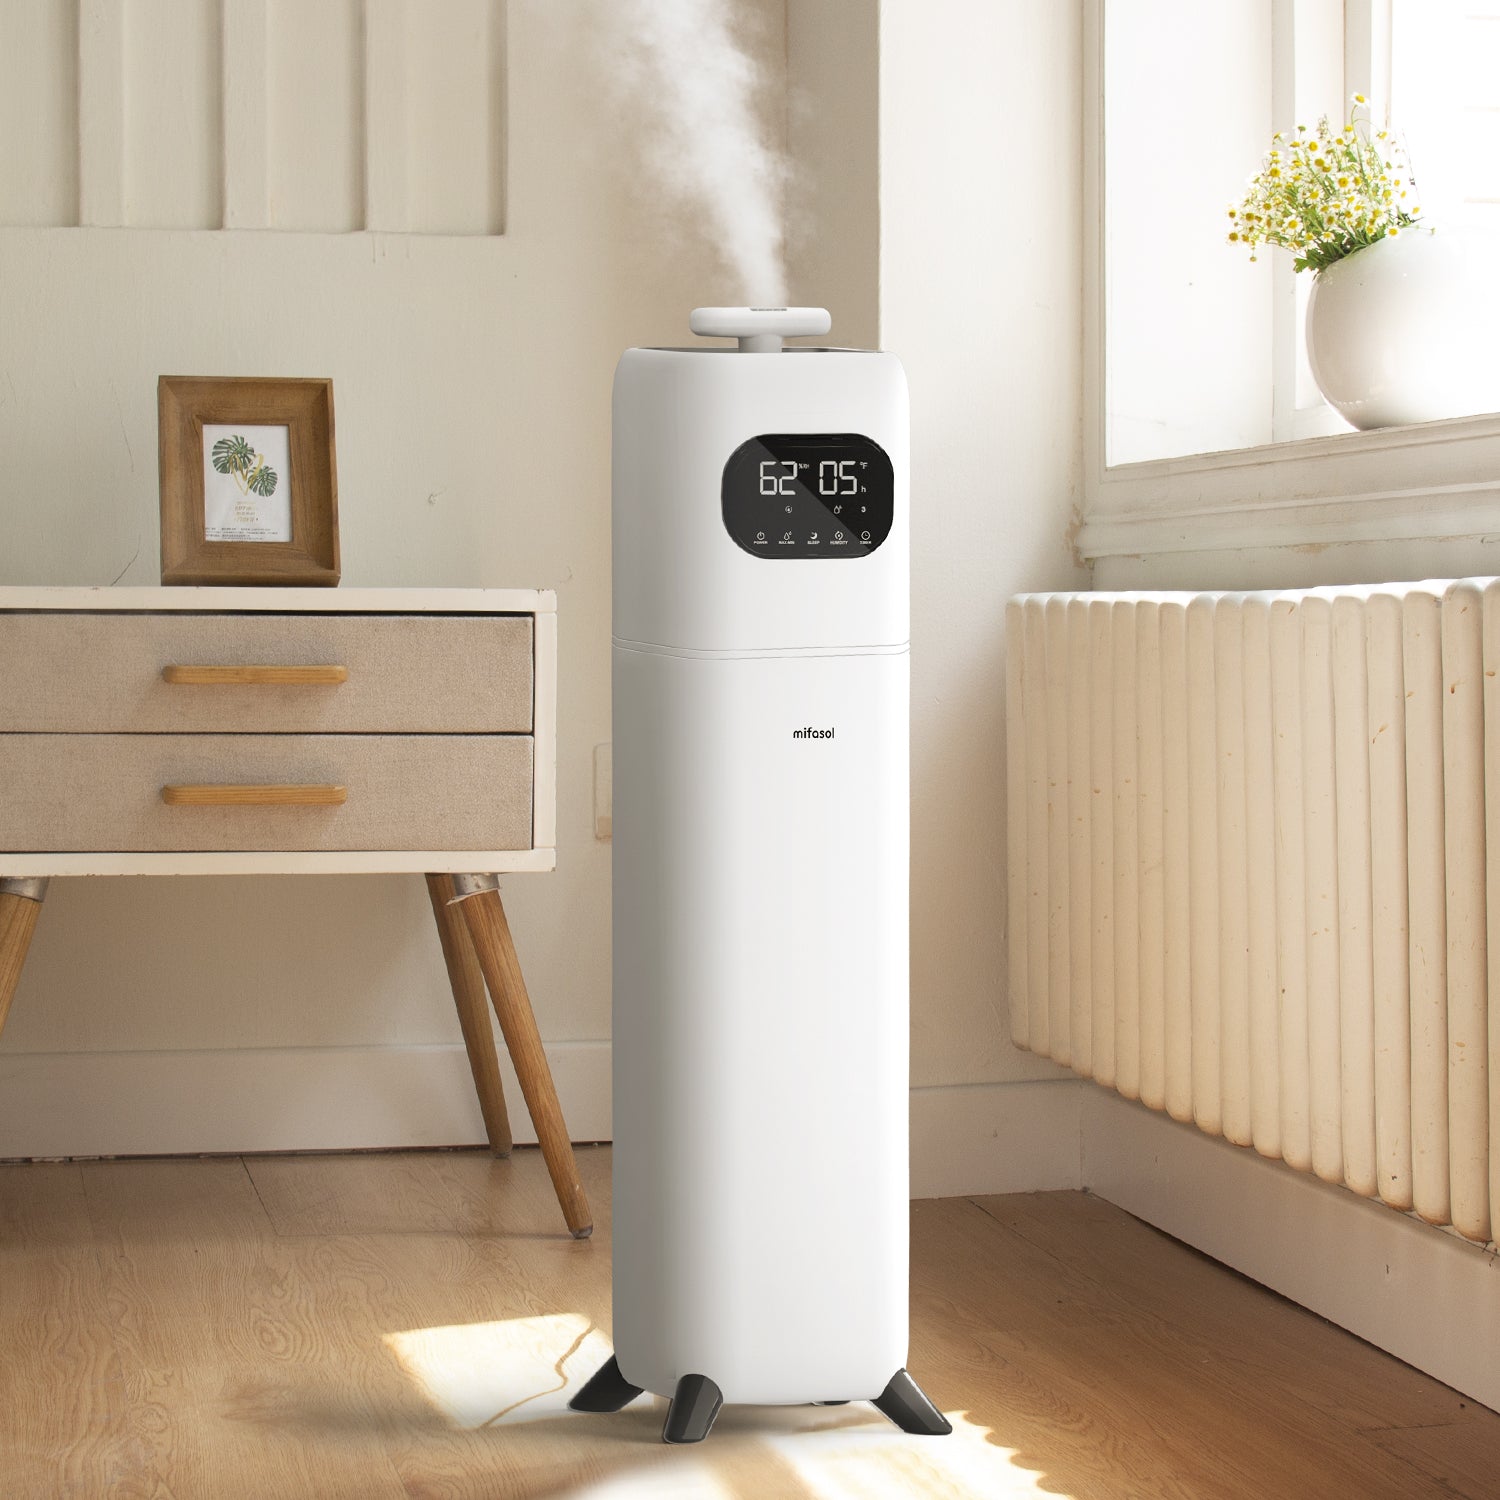 Bedroom Cold Mist Humidifier, Baby Humidifier, Output Adjustable